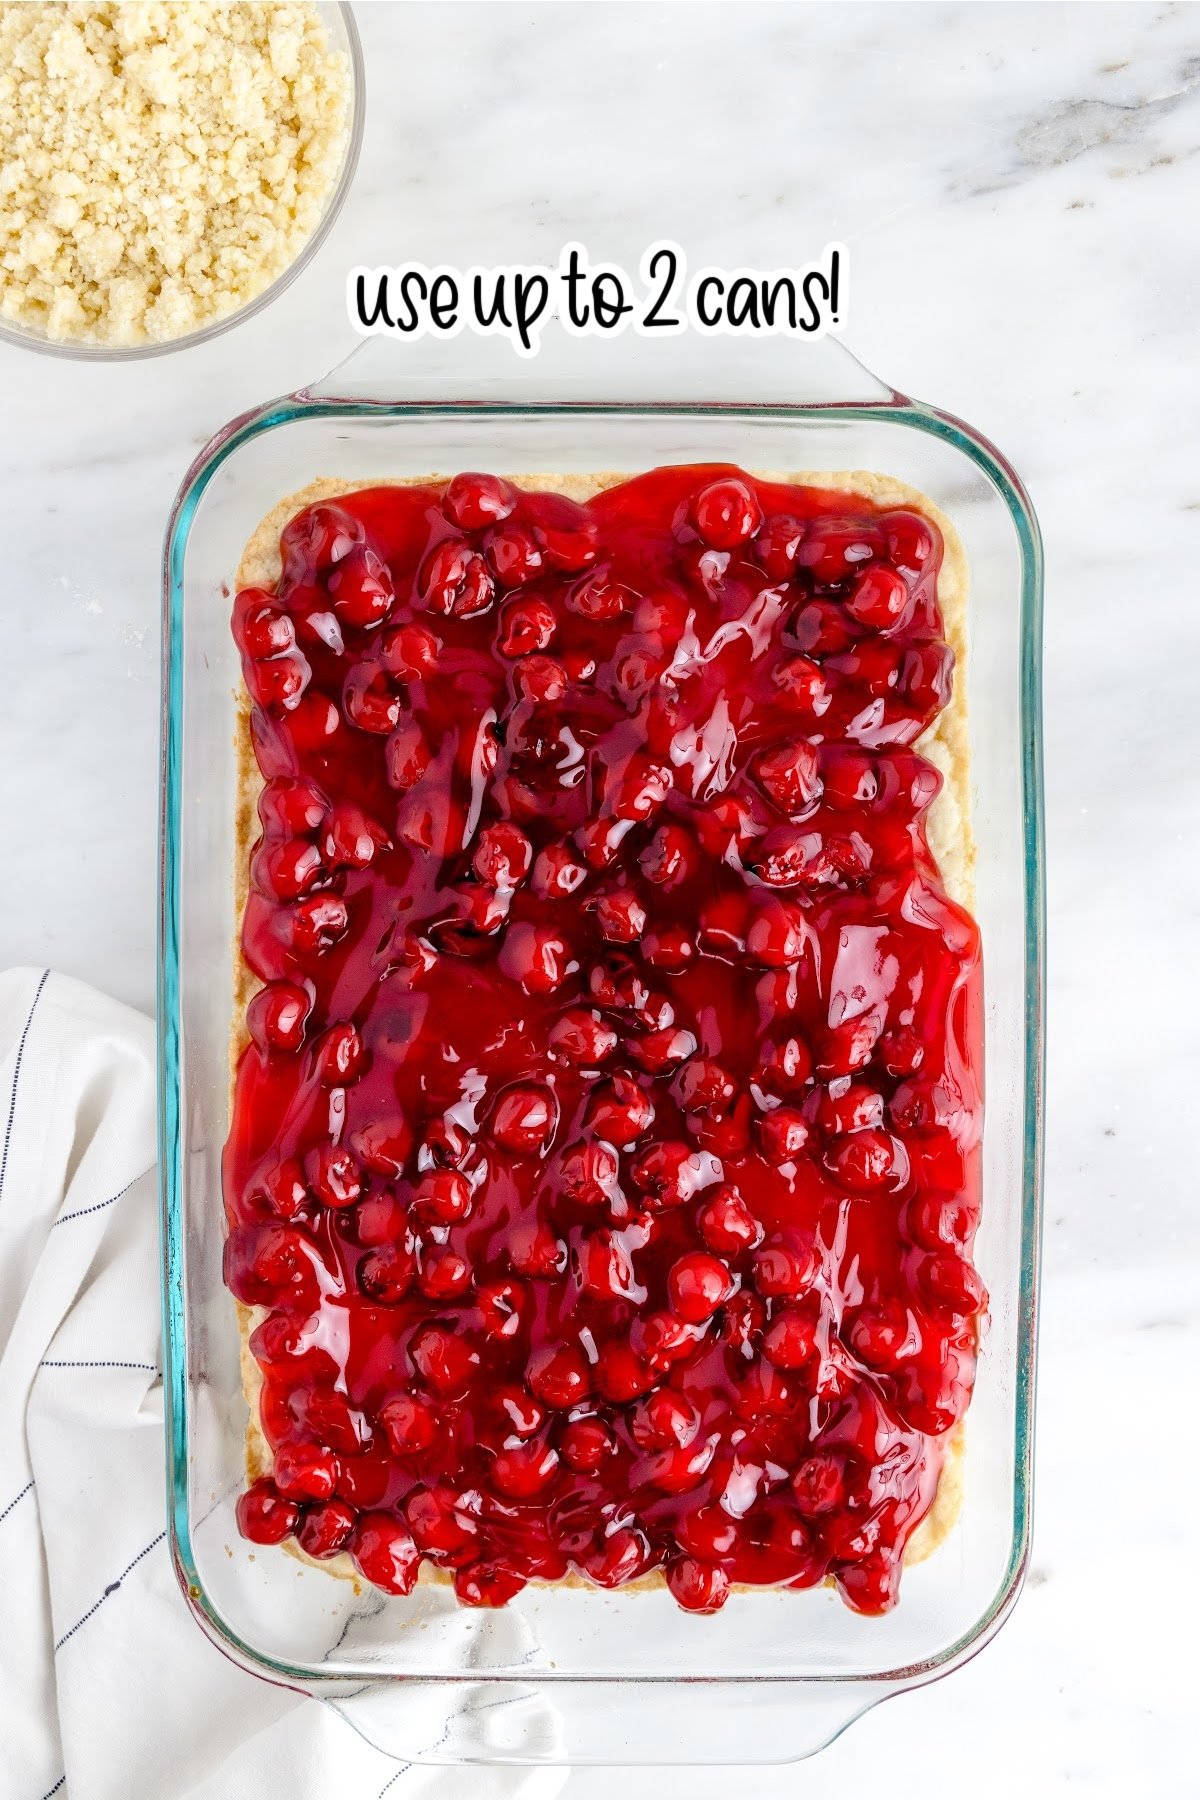 cherry pie filling spread over the baked dough crust on top of a white marble countertop with a cloth next to the baking dish and text "use up to 2 cans."